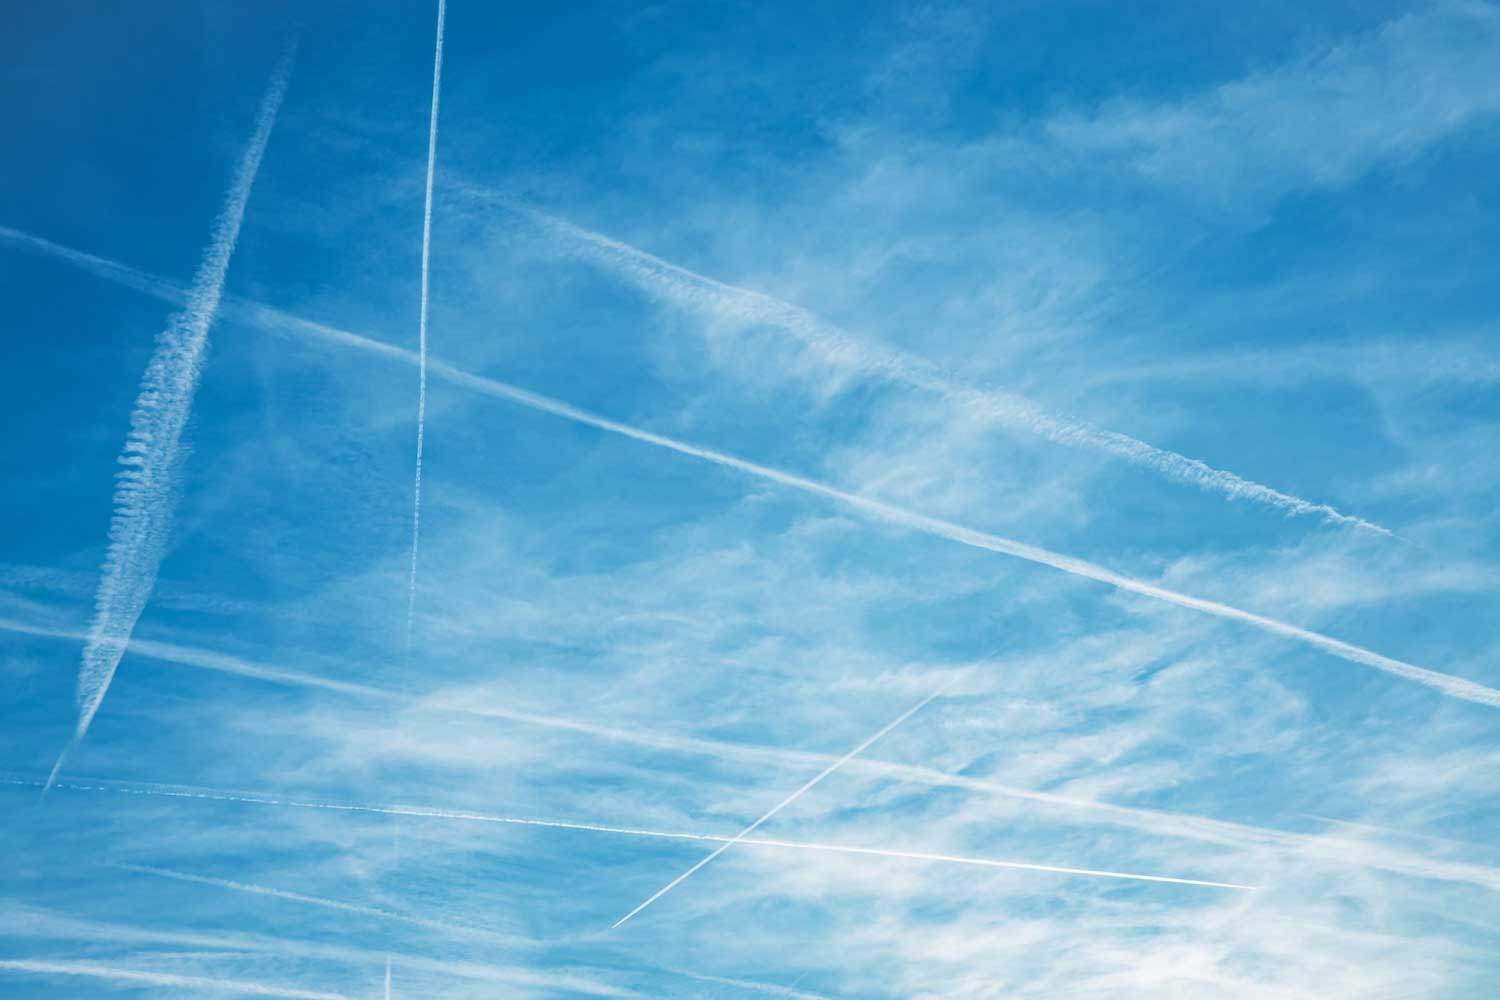 Contrails criss-crossing the sky with thin, scattered clouds above them.